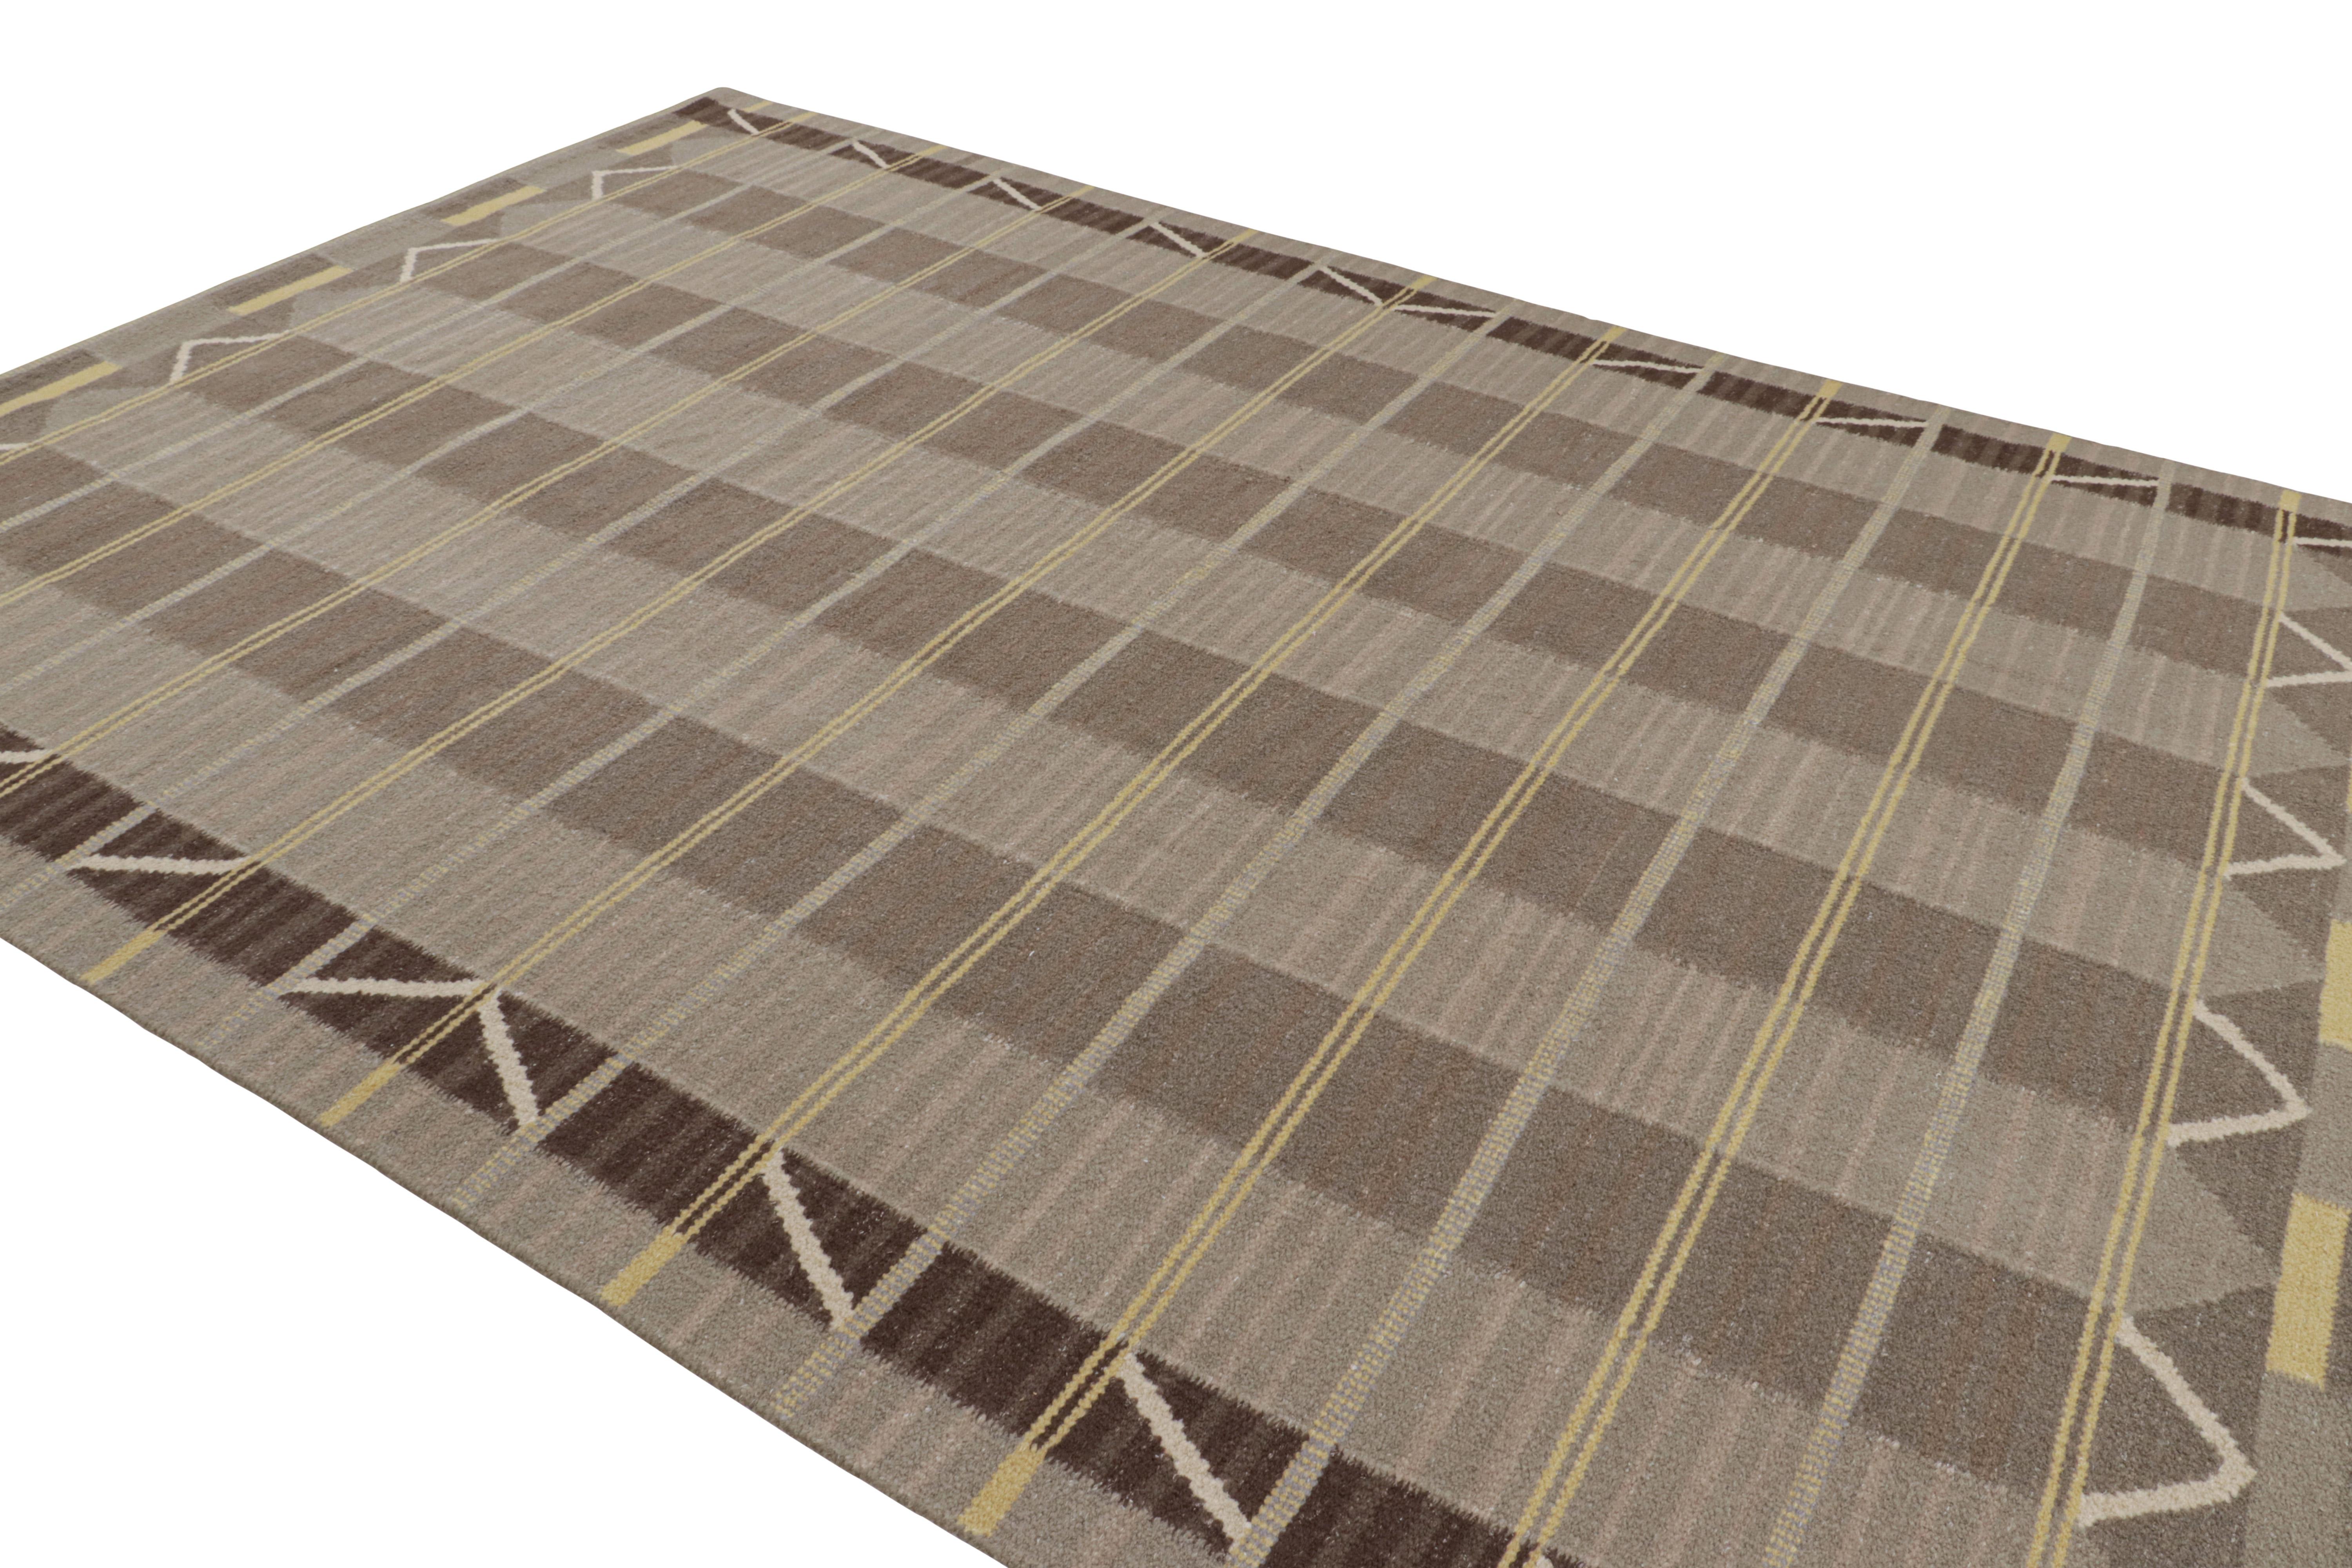 Indian Rug & Kilim’s Scandinavian Style Rug in Beige-Brown with Geometric Patterns For Sale